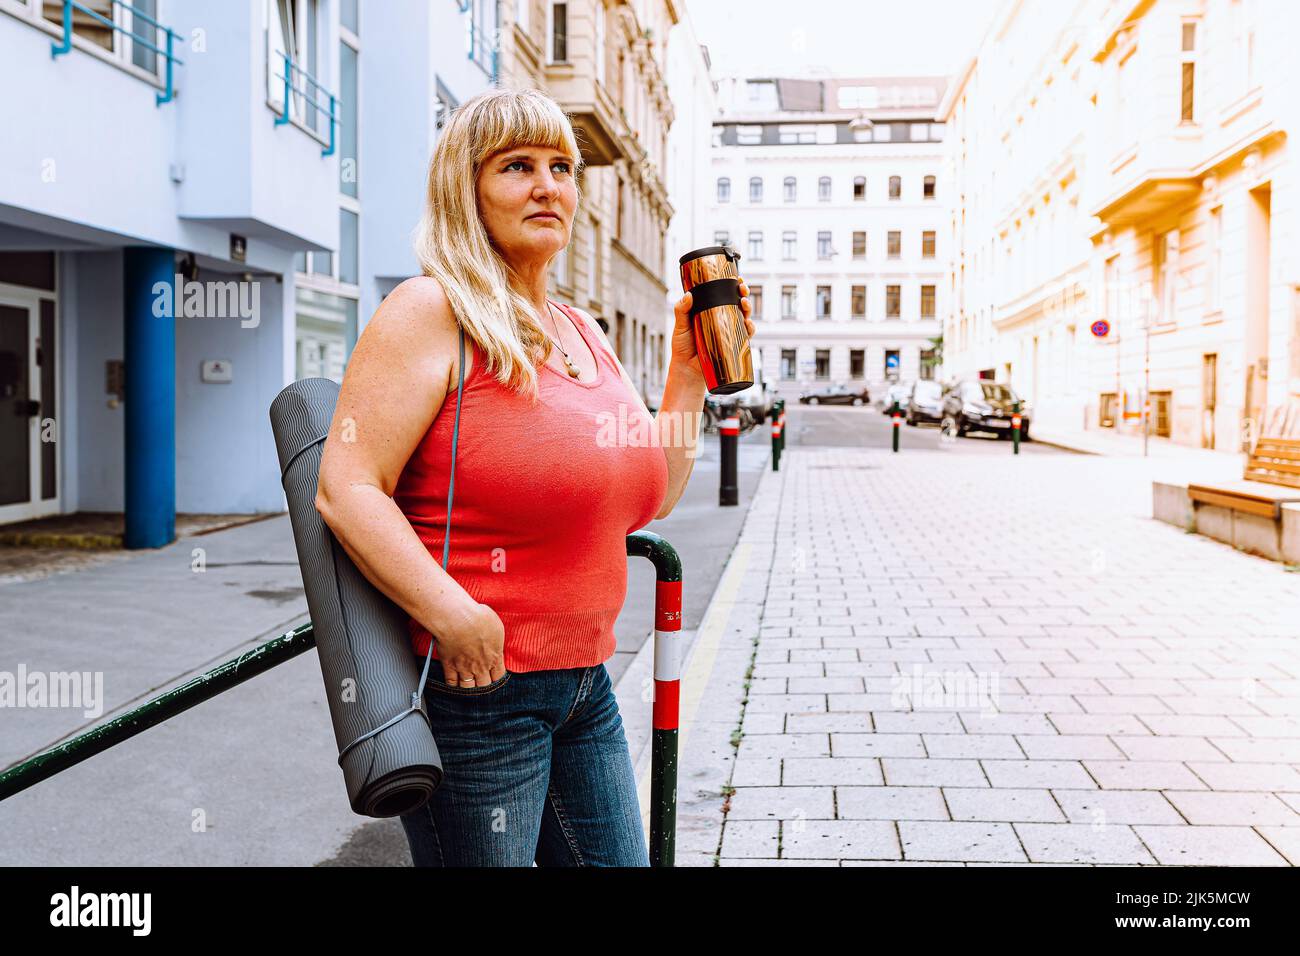 Mature happy middle aged woman 40s, long blond hair, smiling, big breasts,  in jeans, holding yoga mat, thermos in hands, against backdrop of European  Stock Photo - Alamy